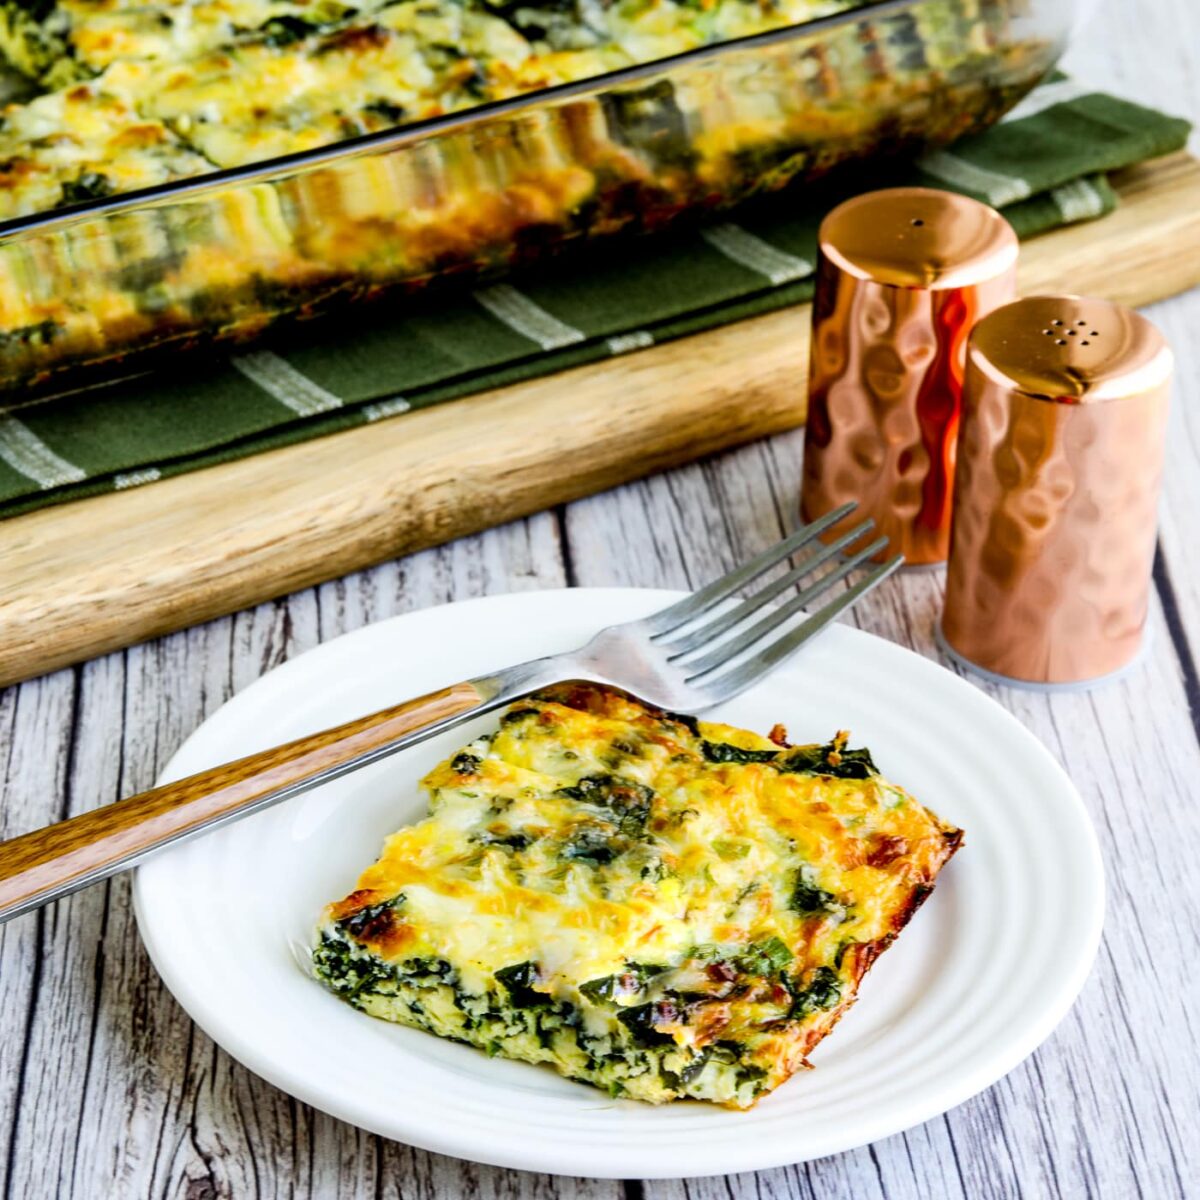 Square image of Kale, Mozzarella, and Egg Bake shown on serving plate with baking dish in back.